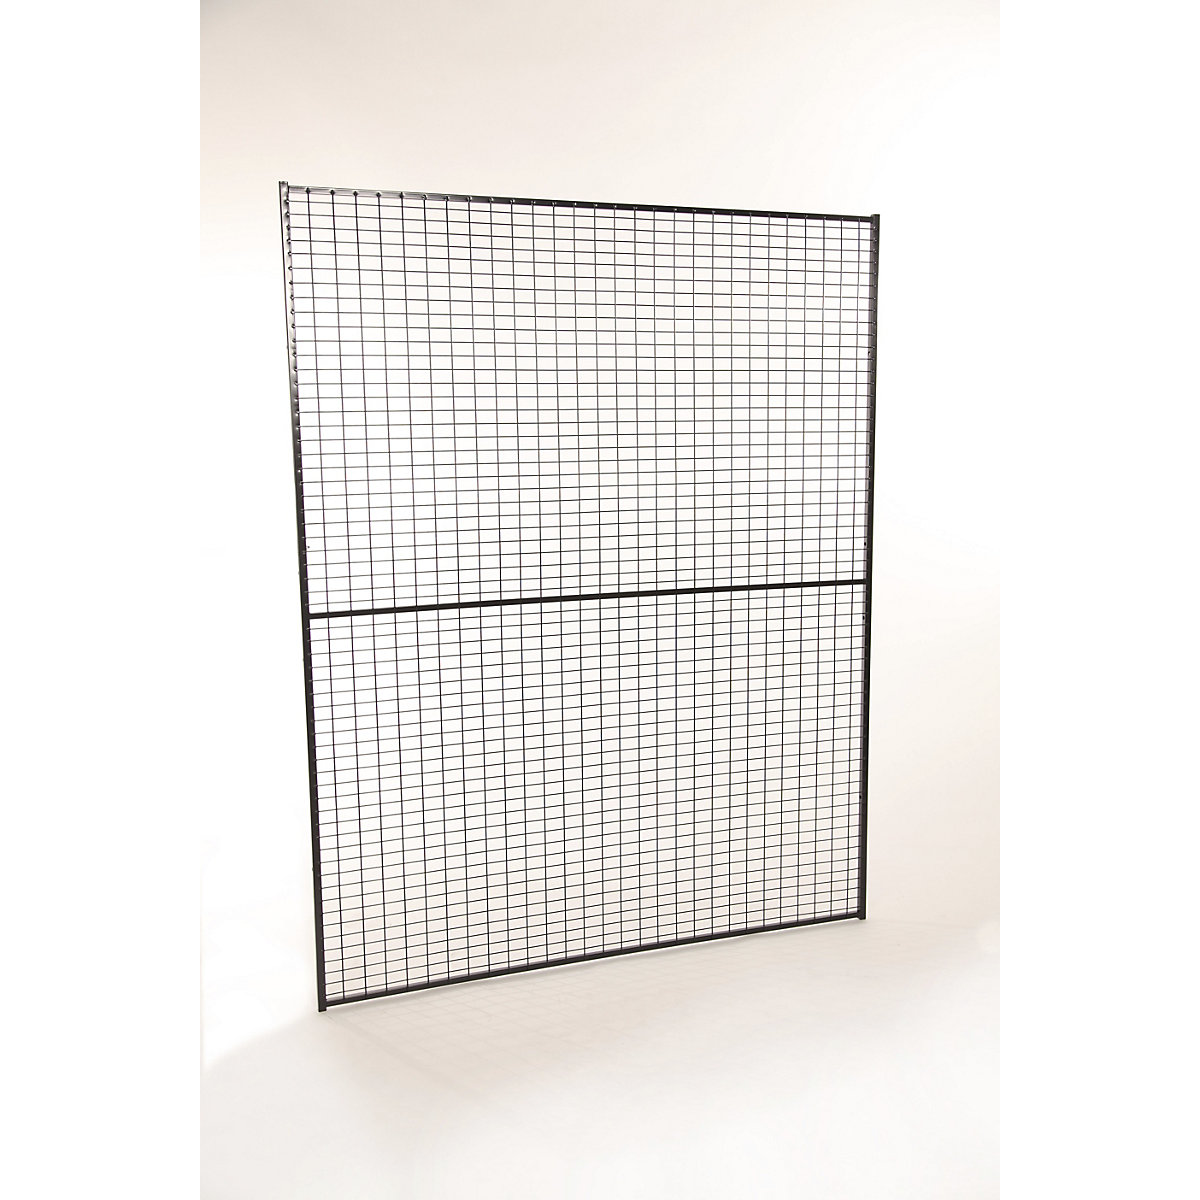 X-GUARD LITE machine protective fencing, wall section – Axelent, height 2200 mm, width 1500 mm-4